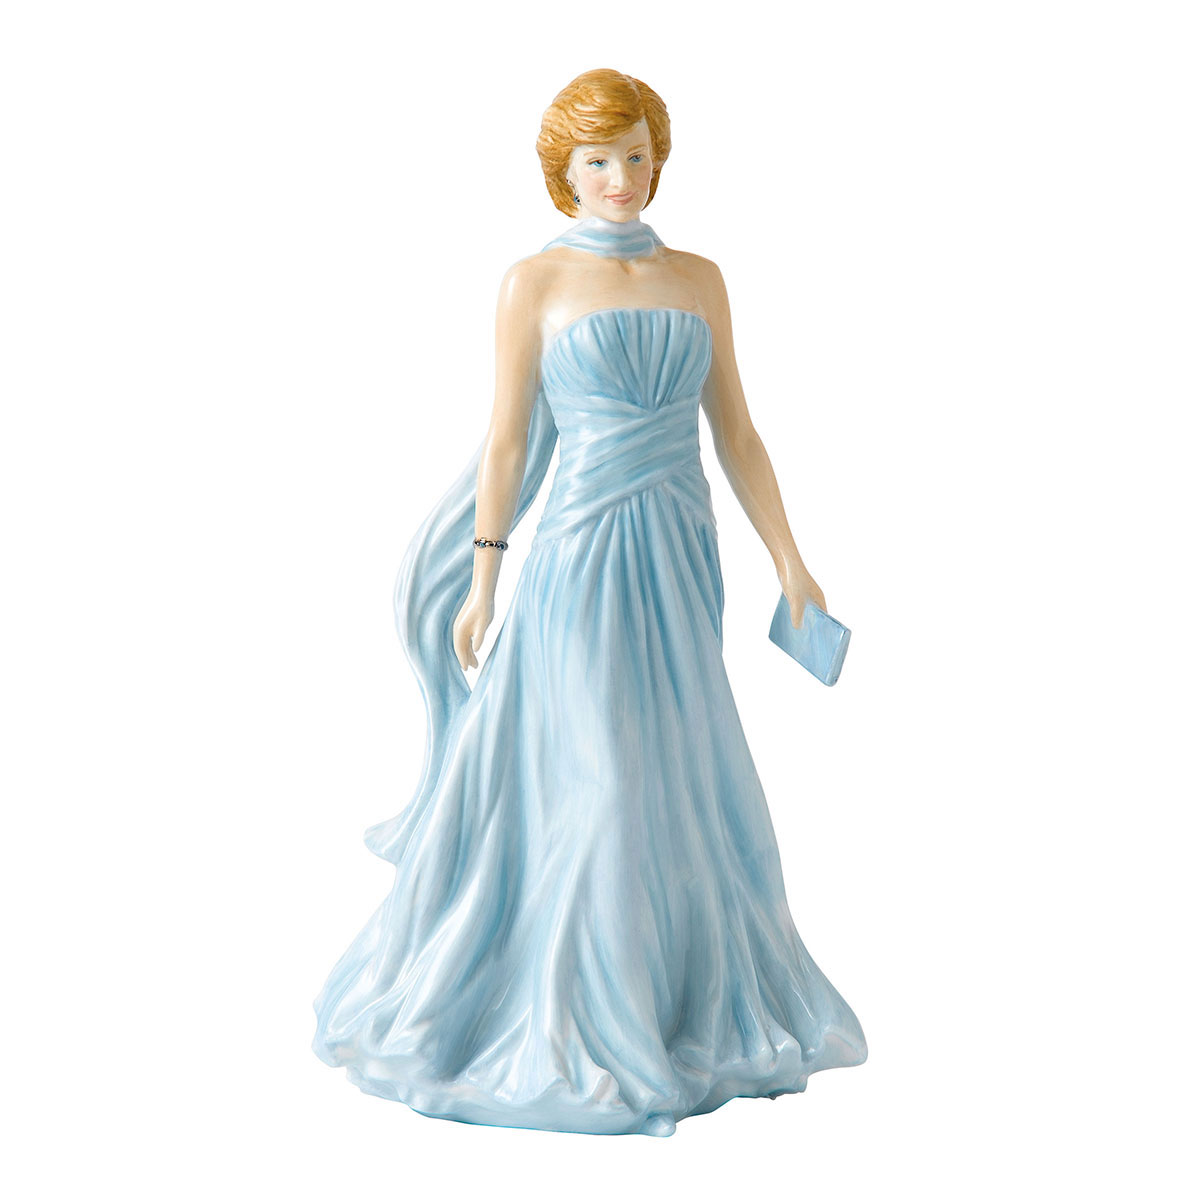 Royal Doulton Remembering Diana The People